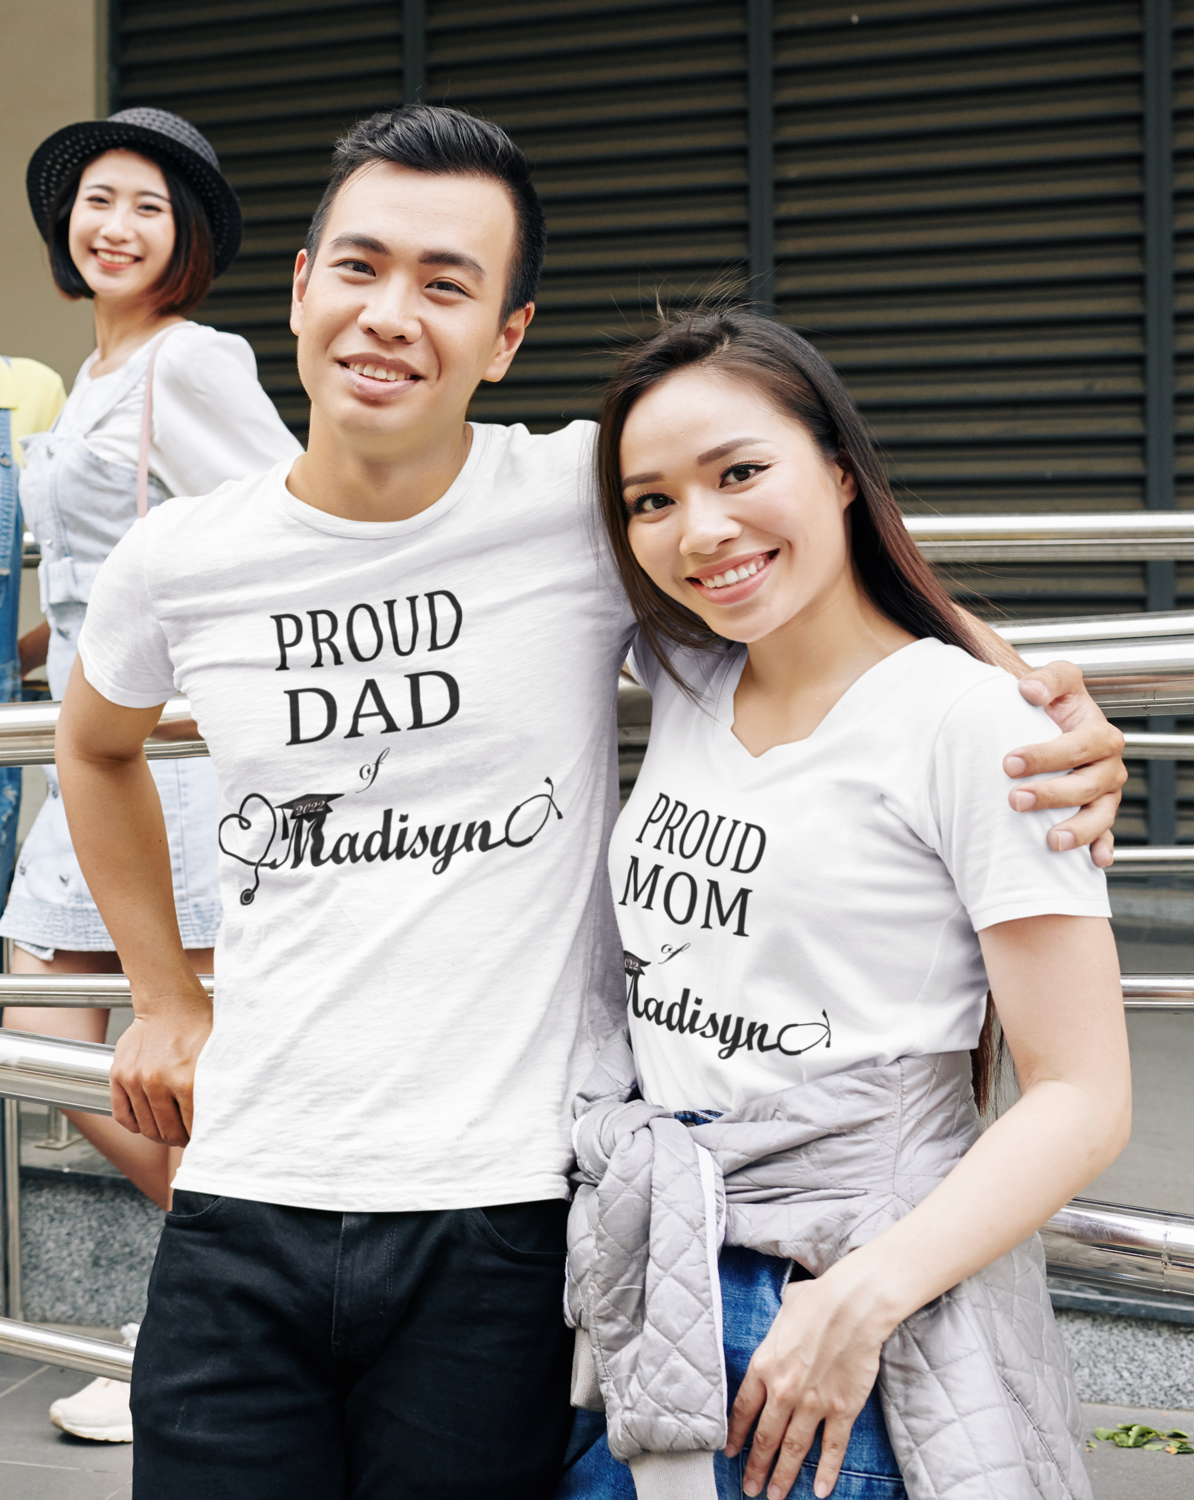 Medical Graduate "Proud Mom" or "Proud Dad" Personalized Unisex Short-sleeved t-shirt